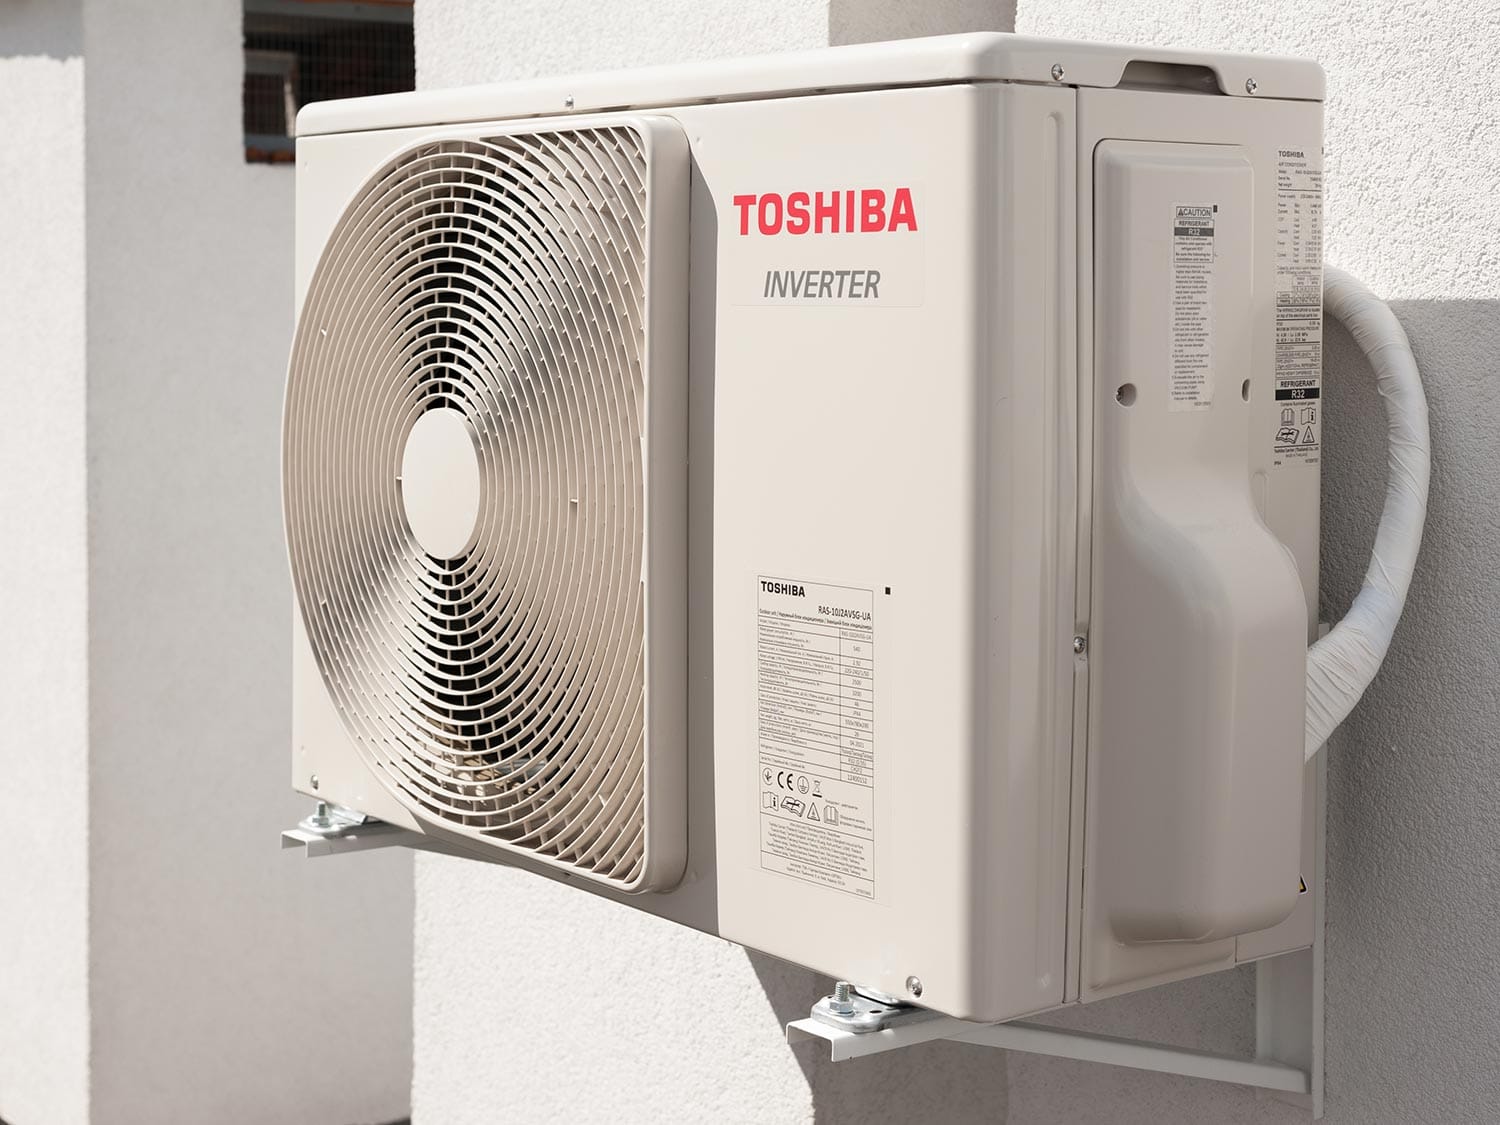 Toshiba air conditioner outdoor unit installed on the wall